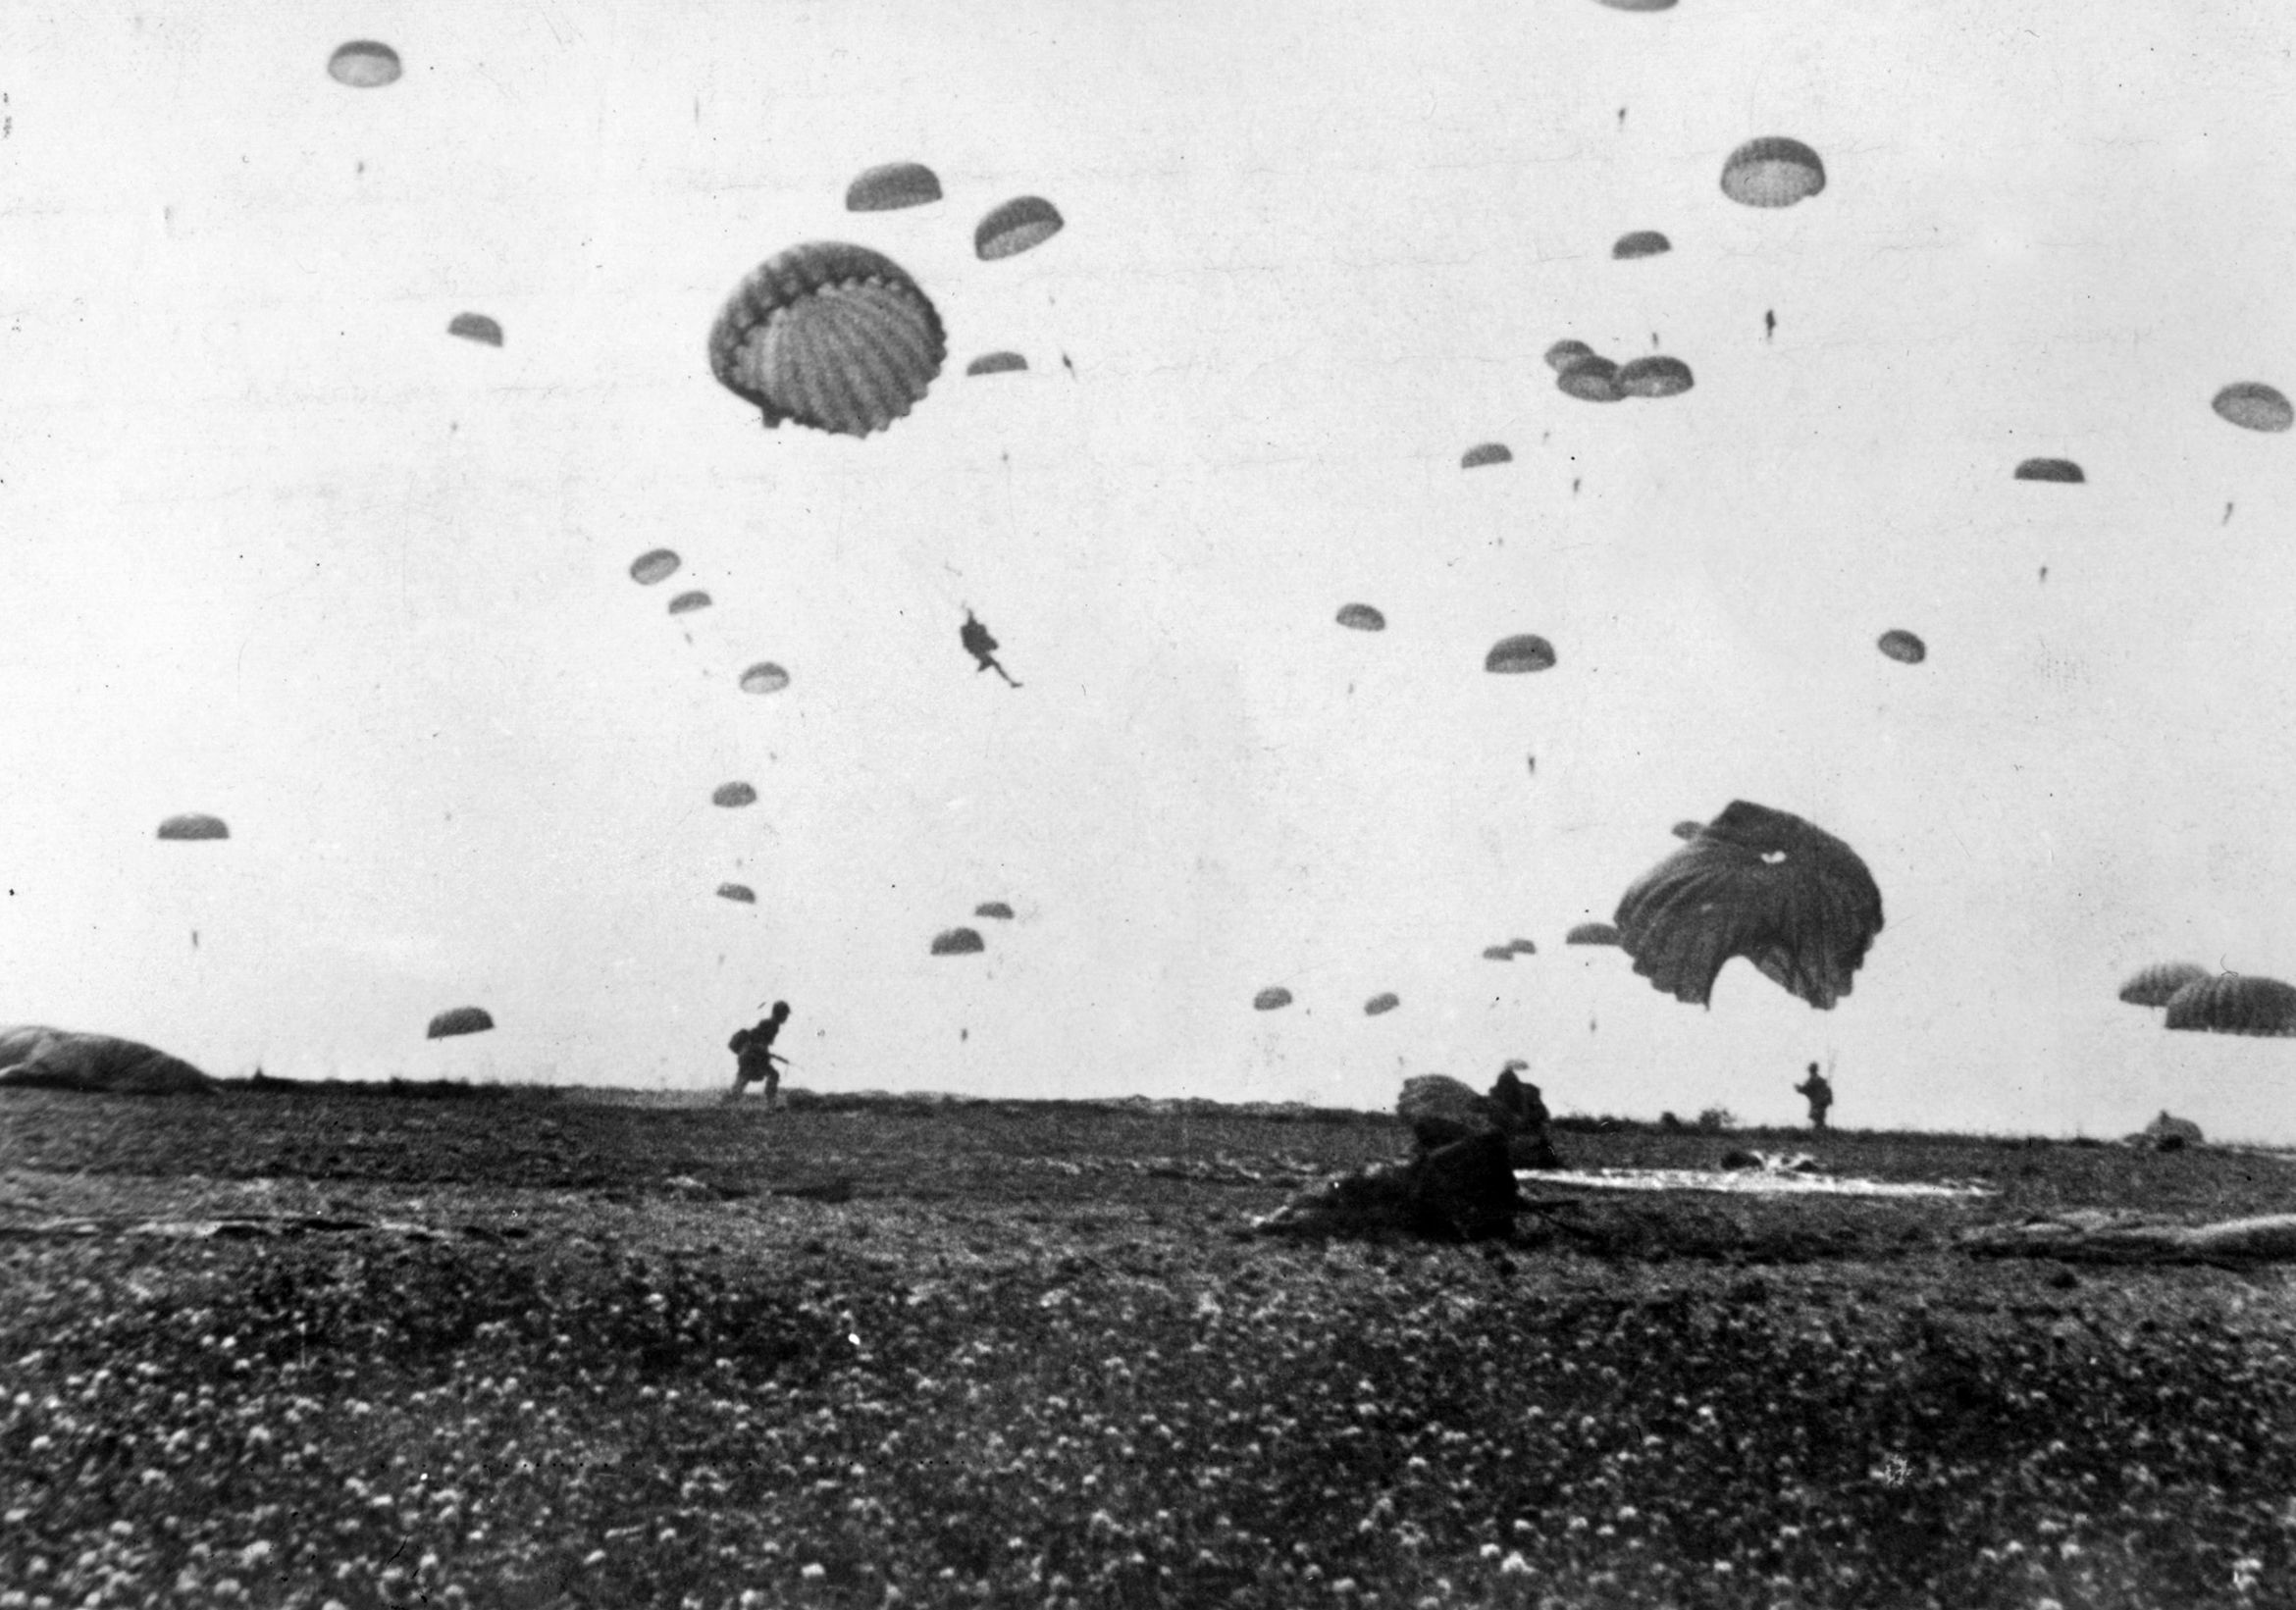 The sky of Holland is filled with American paratroopers while others are already out of their harnesses and running off the drop zone toward their assembly areas. 